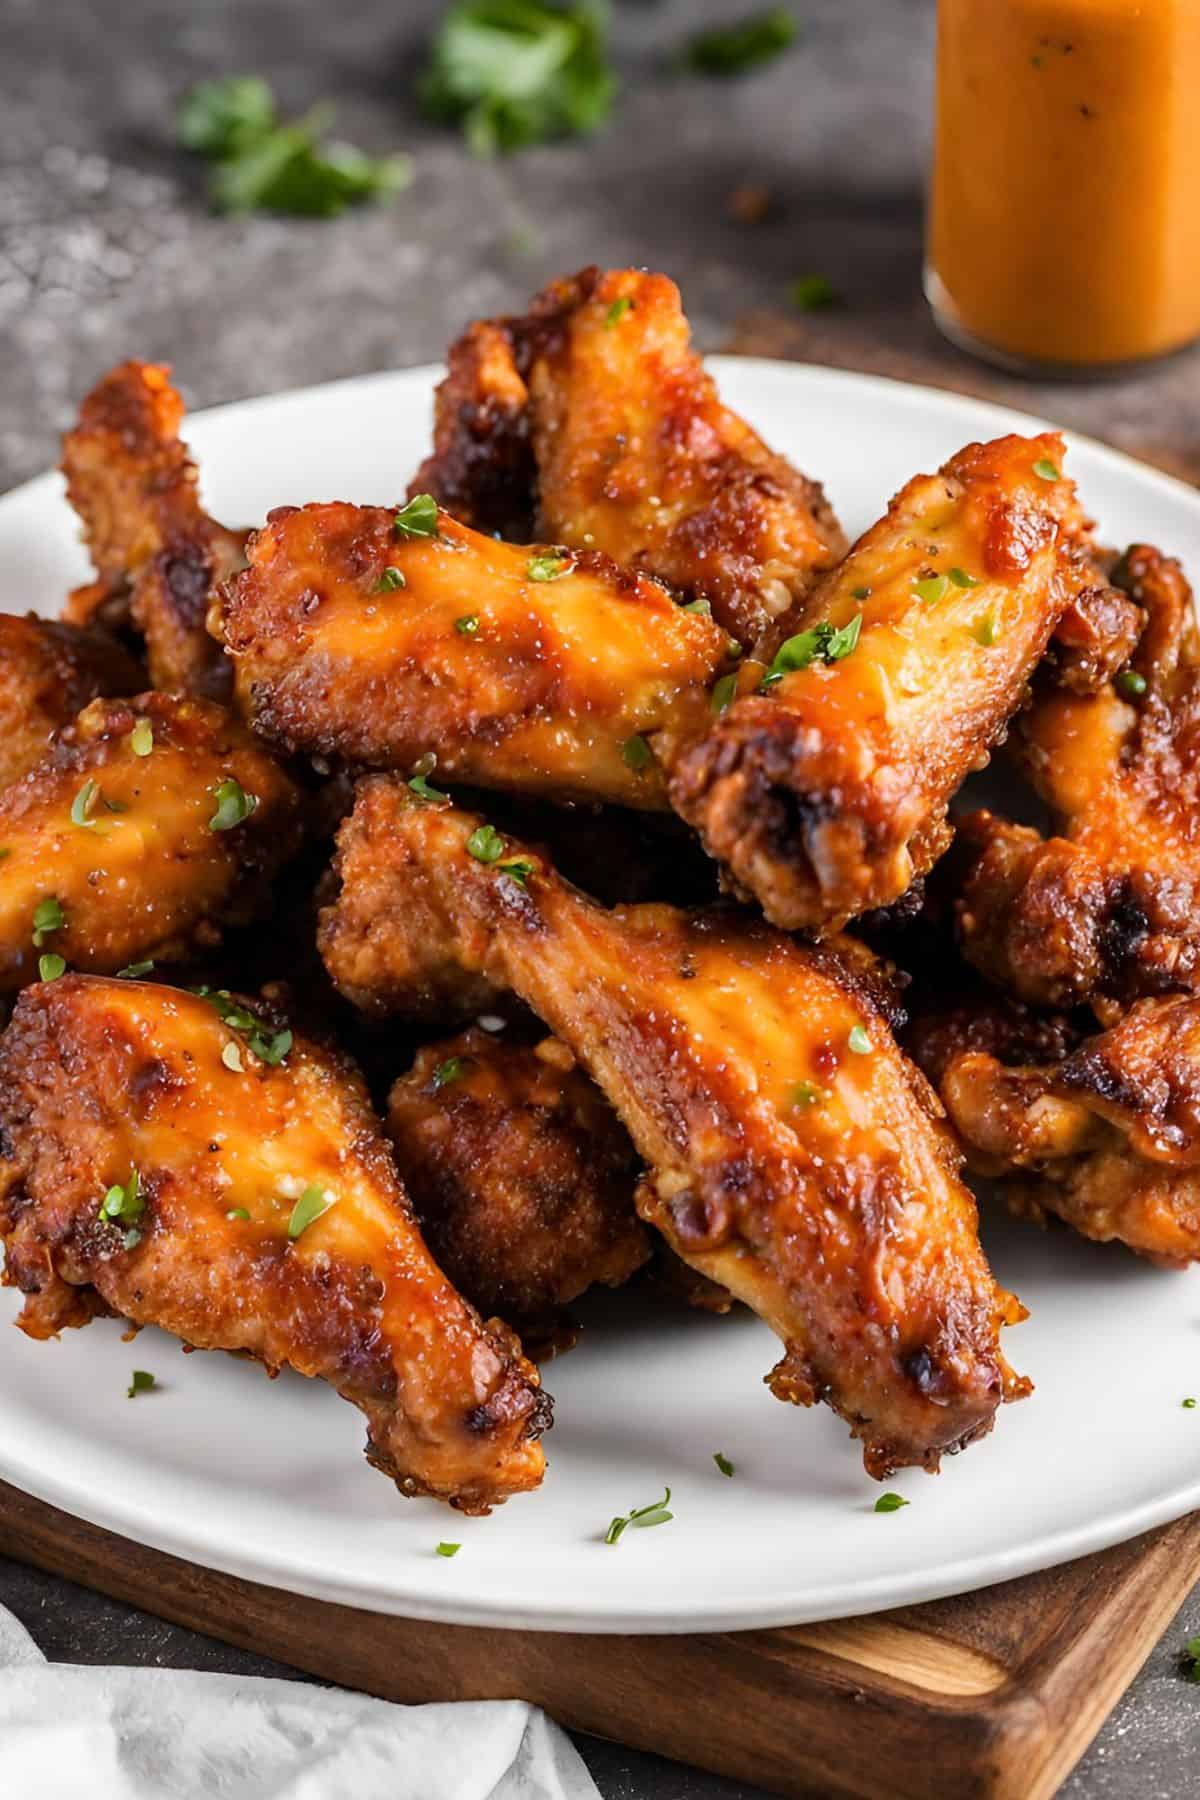 Baked chicken wings on a plate with sauce on the side.